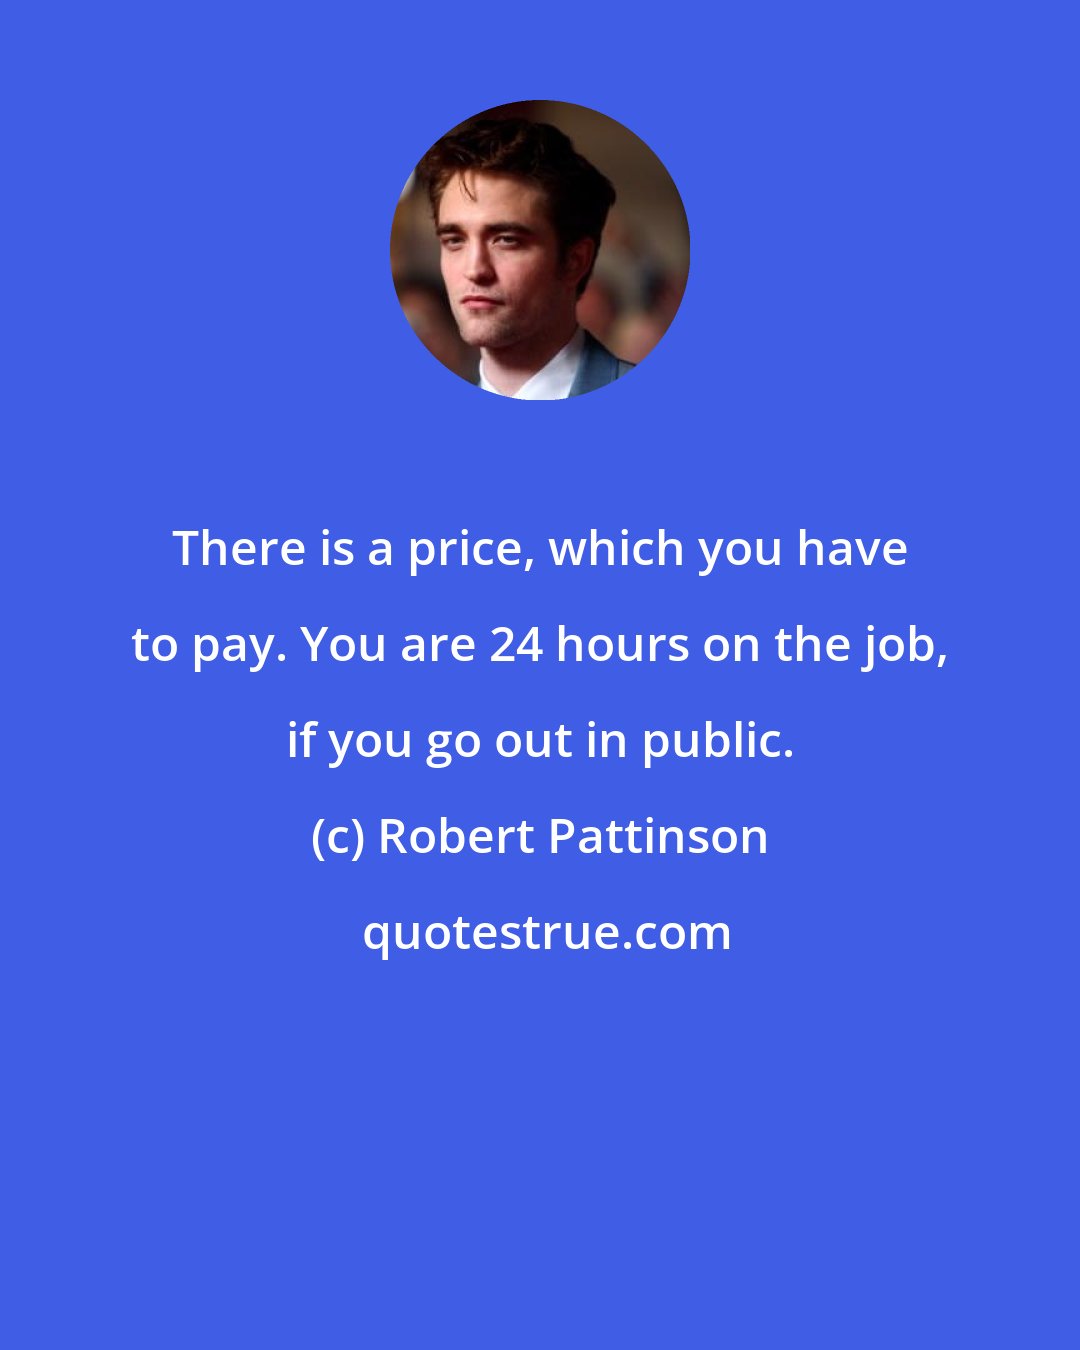 Robert Pattinson: There is a price, which you have to pay. You are 24 hours on the job, if you go out in public.